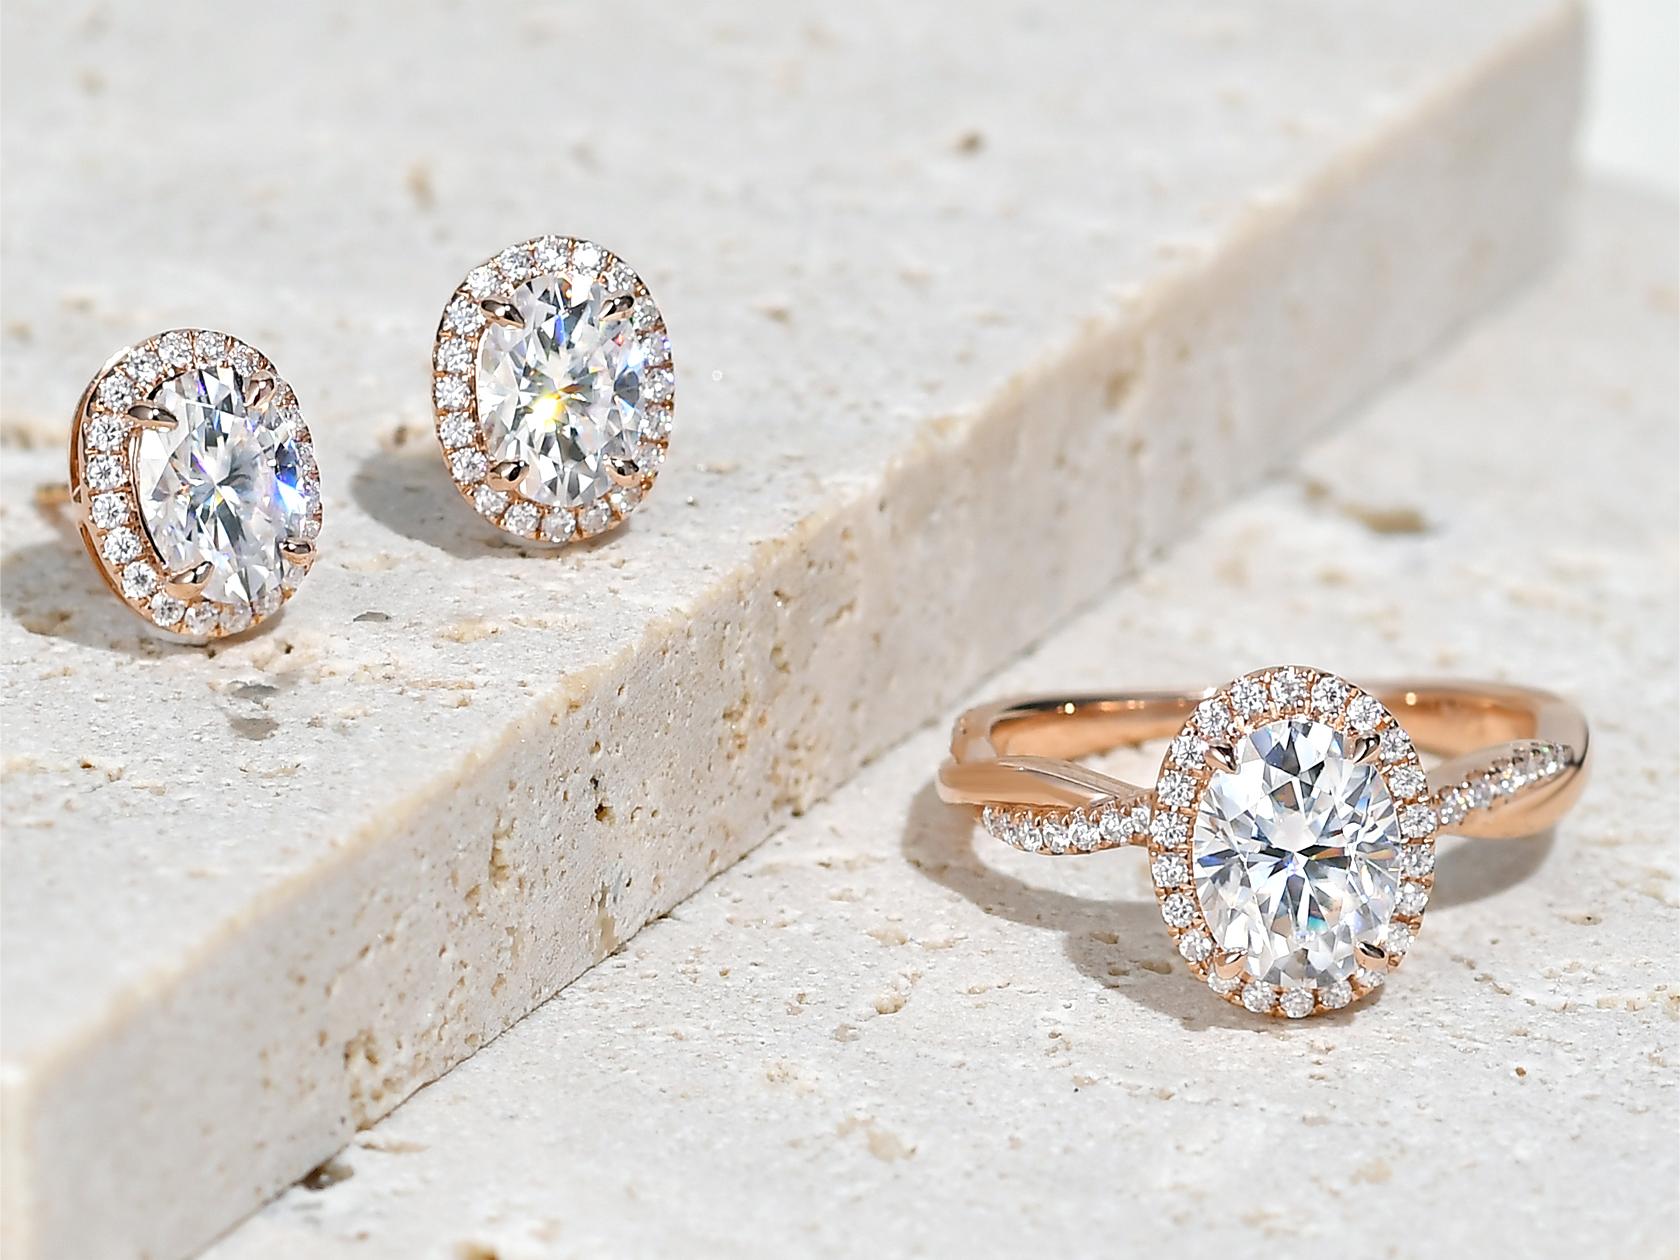 What Ethical Considerations Come With Choosing A Vintage Moissanite Ring?